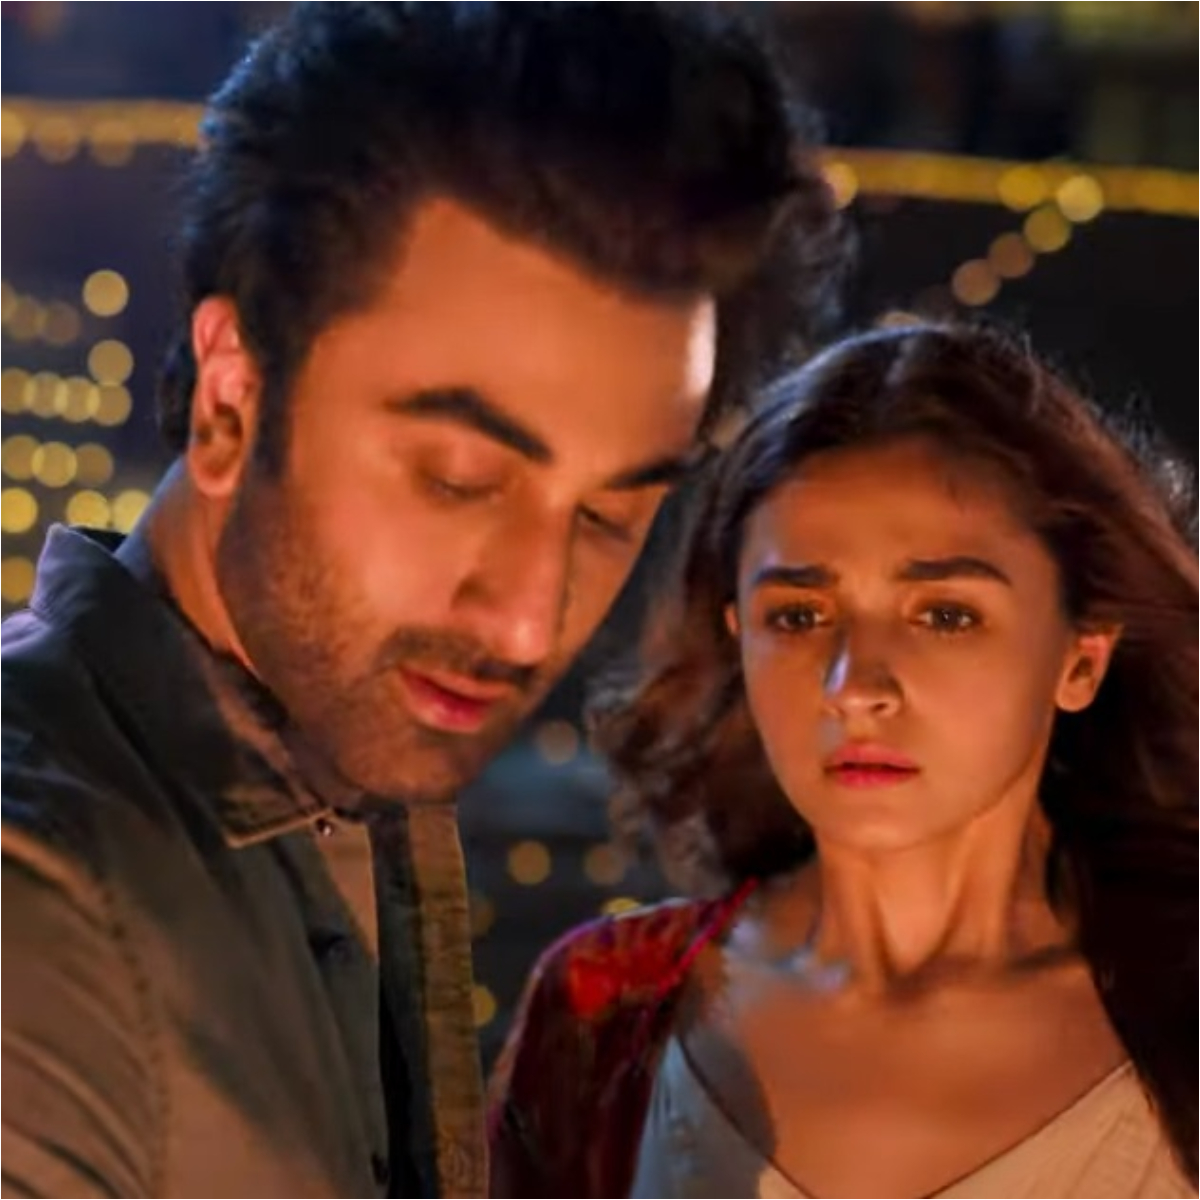 Advance Booking Report: Brahmastra sells 1.30 lakh tickets; Competing with TZH, Sanju, Sultan & Dangal